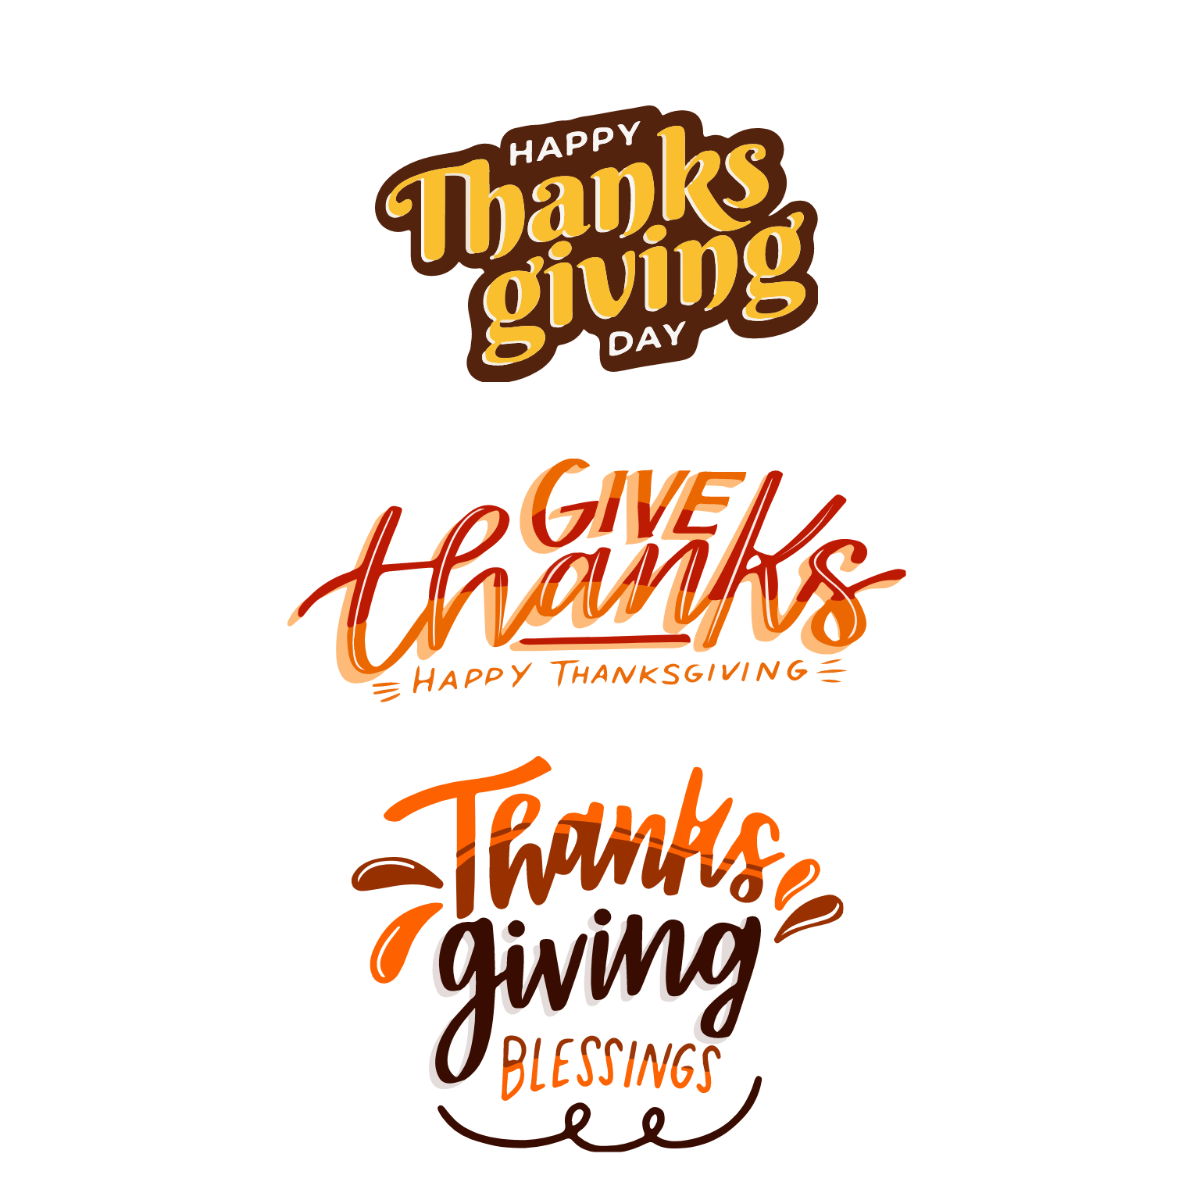 Happy Thanksgiving Text Vector Template